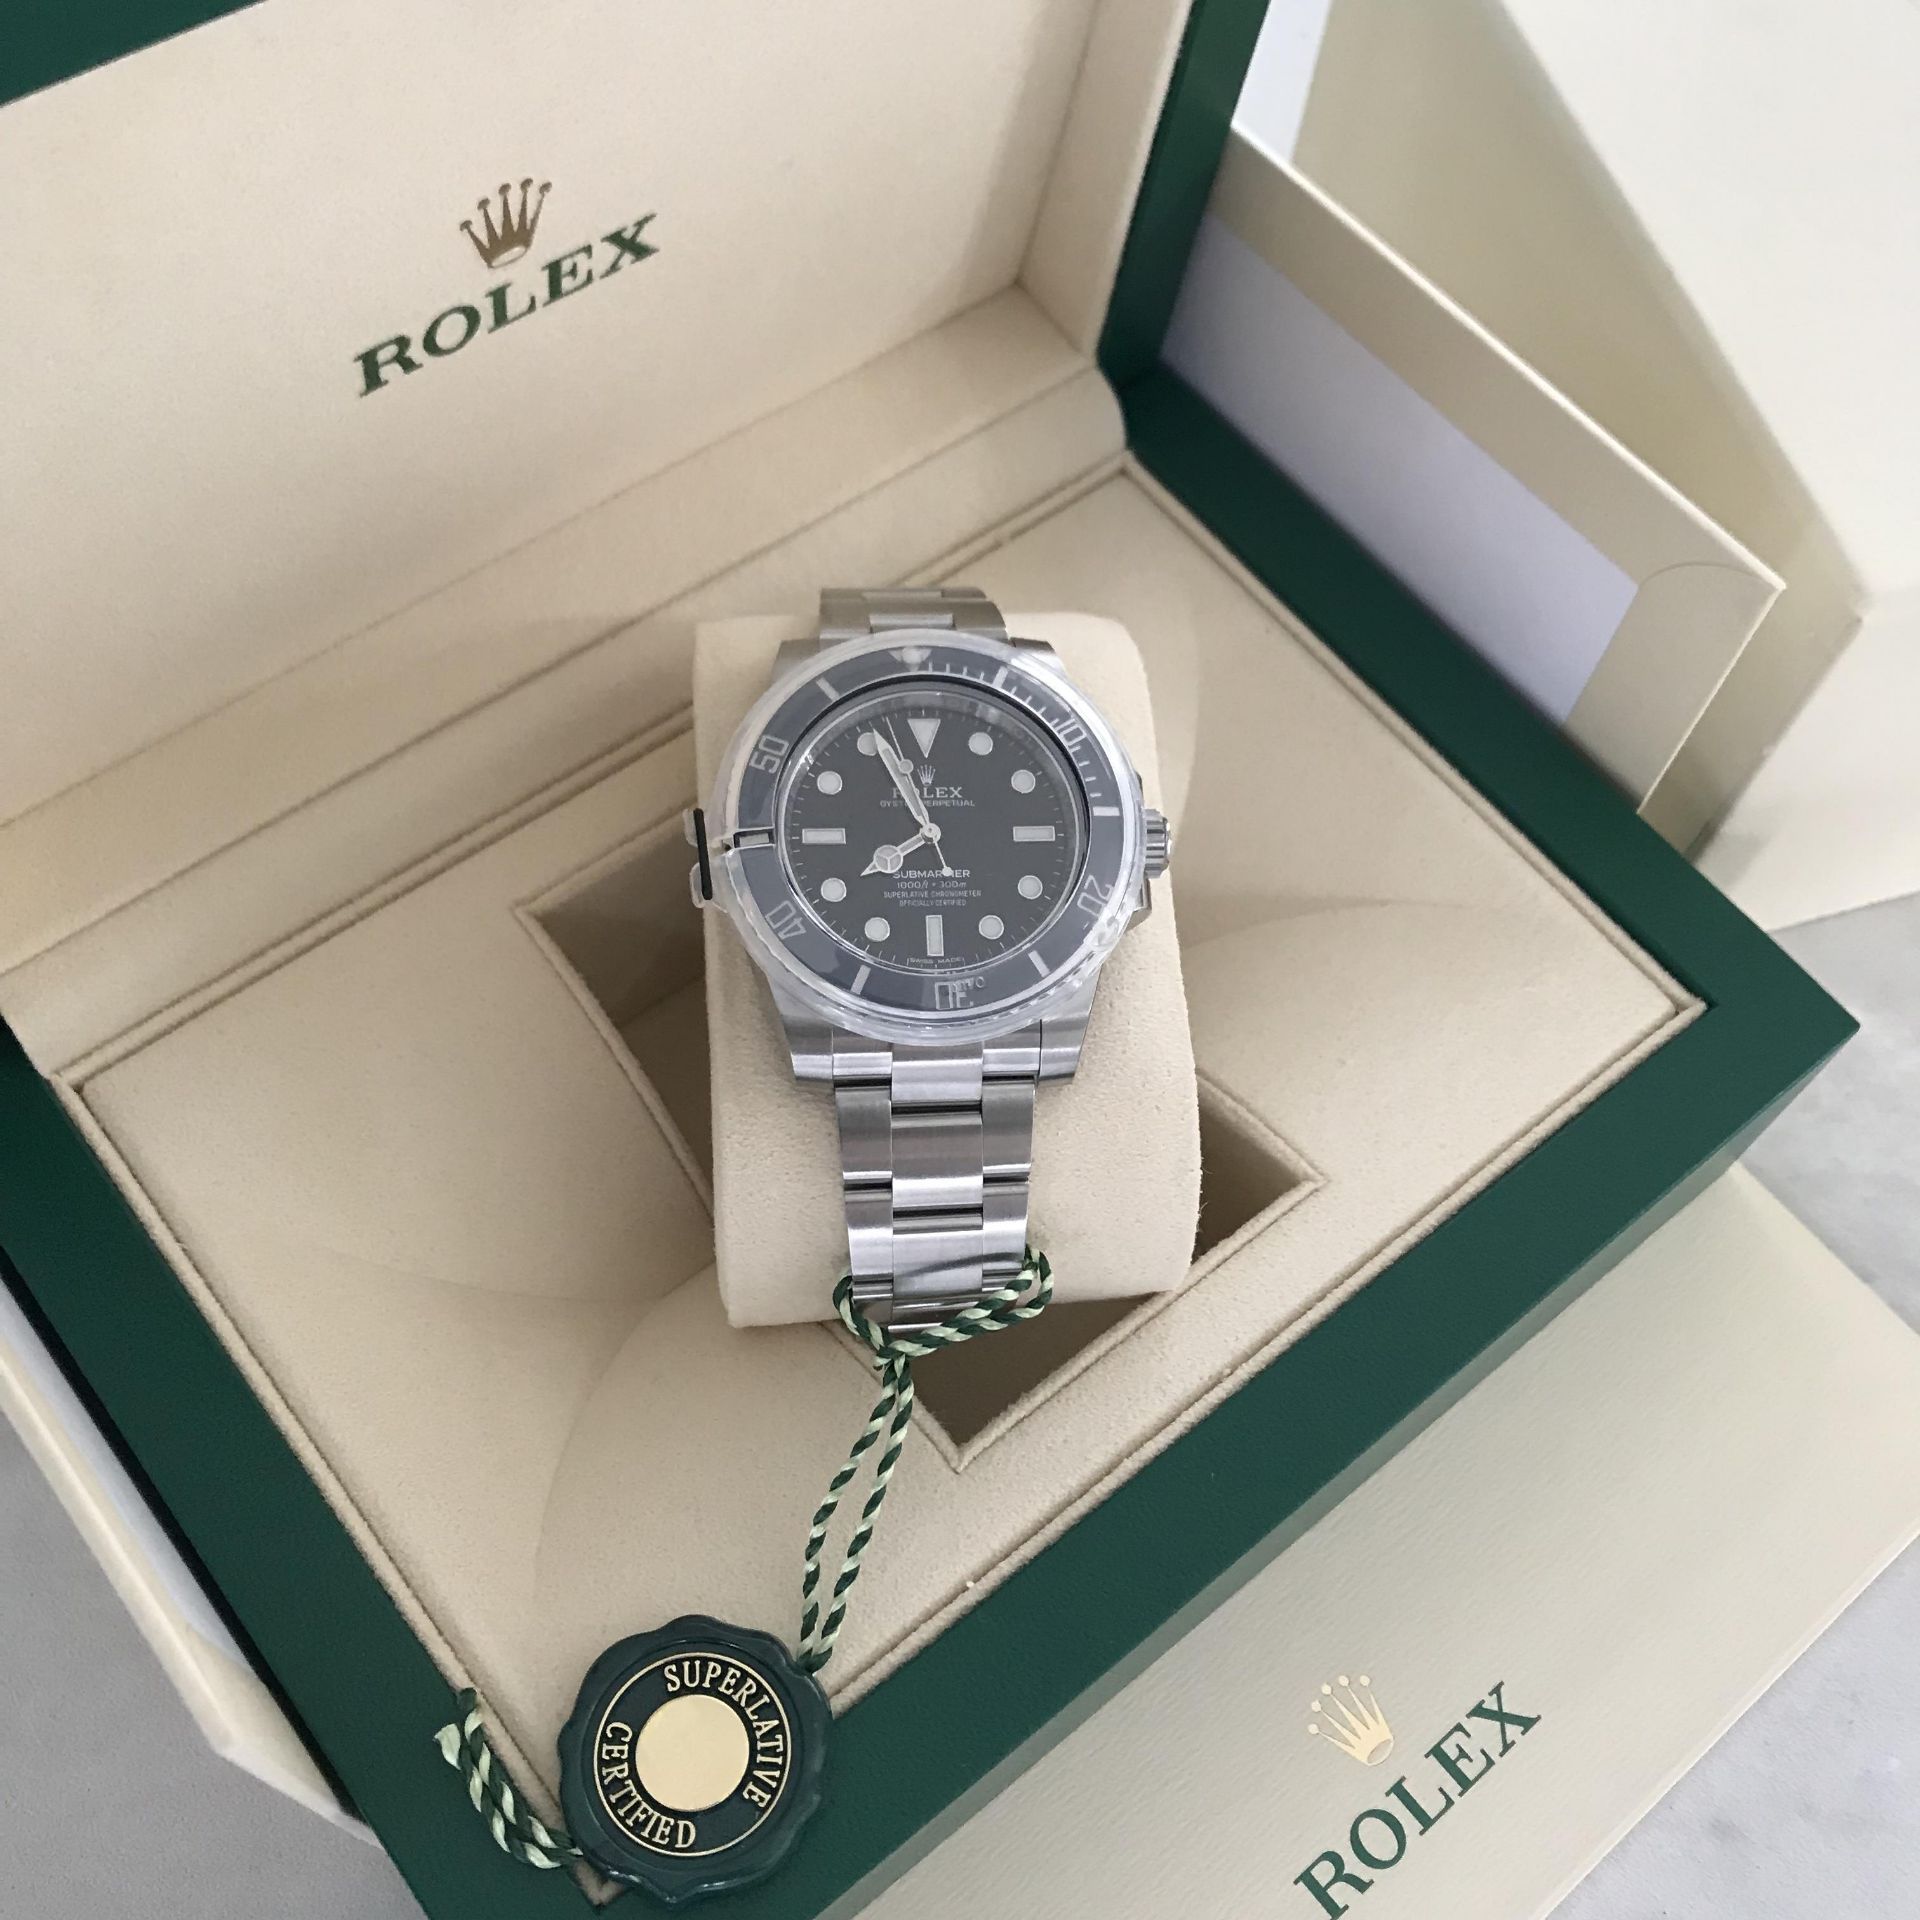 2020 ROLEX SUBMARINER OYSTER STEEL 40 MM WATCH 114060 - Image 7 of 10